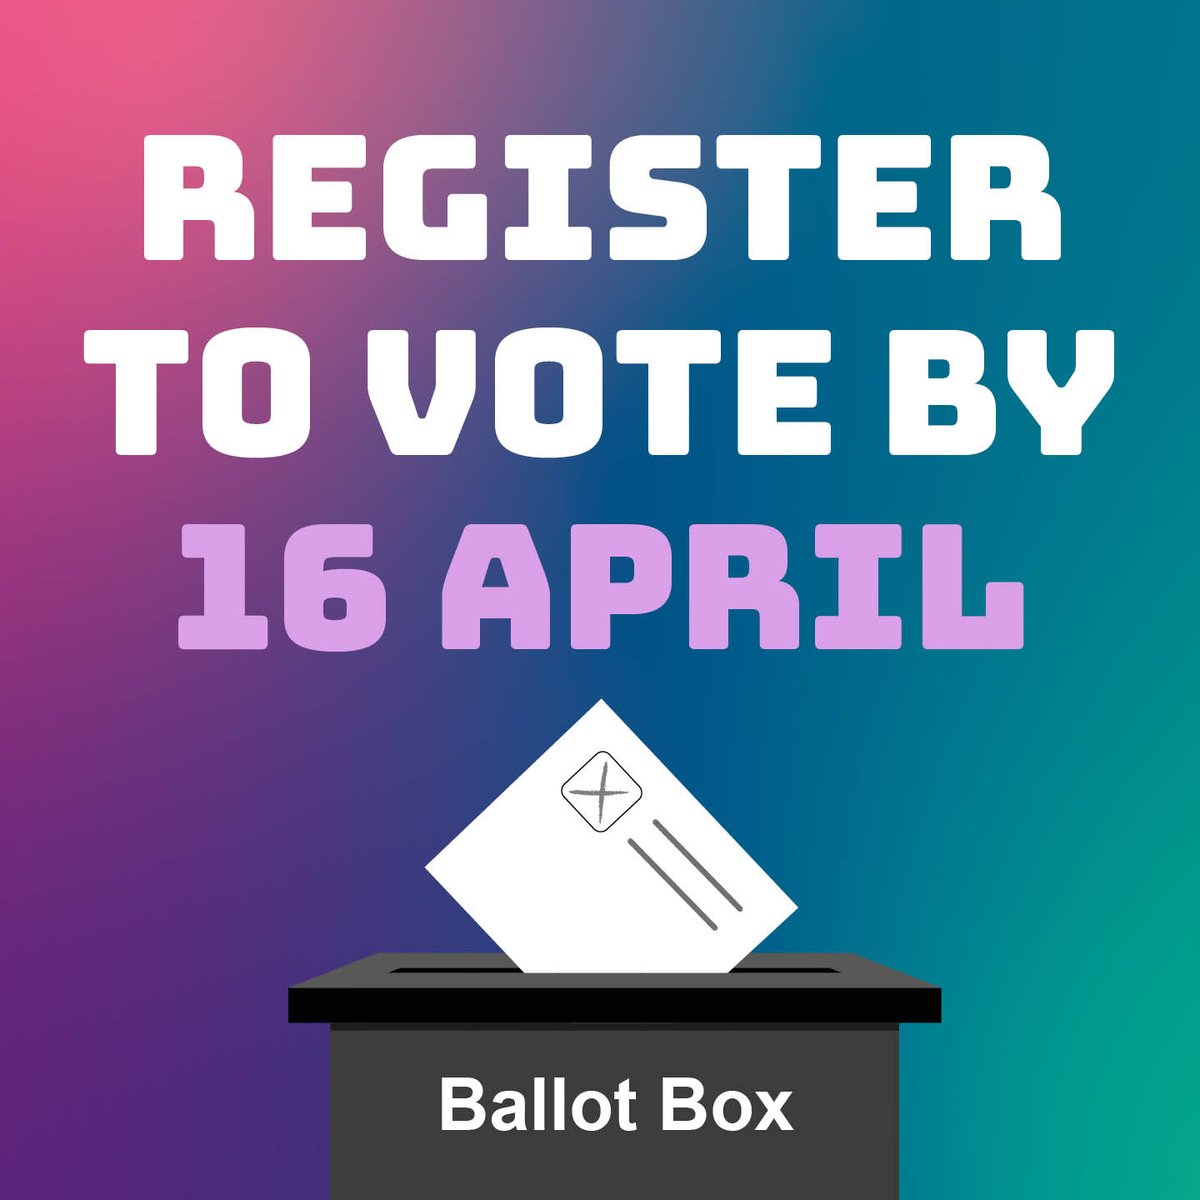 Have you registered to vote? If you’ve moved home or recently changed your name, you will need to register. It only takes a few minutes. Register to vote by 11.59pm on Tuesday 16 April at: ow.ly/sNb750Rac6a #RegisterToVote #YourVoteMatters